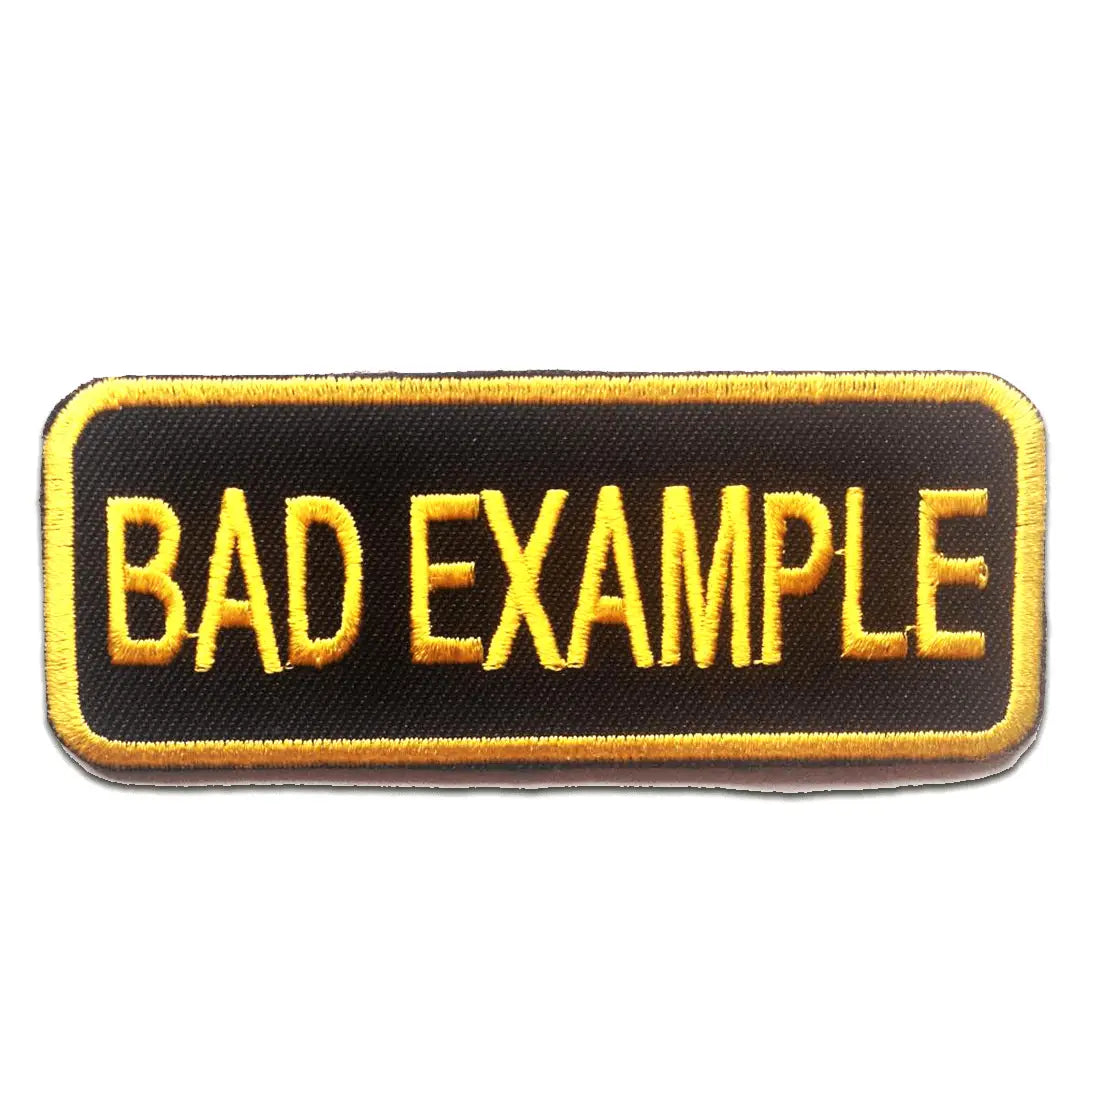 A rectangular name tag style patch that says “BAD EXAMPLE” in yellow embroidered letters on a black background. The border around the patch is also embroidered yellow